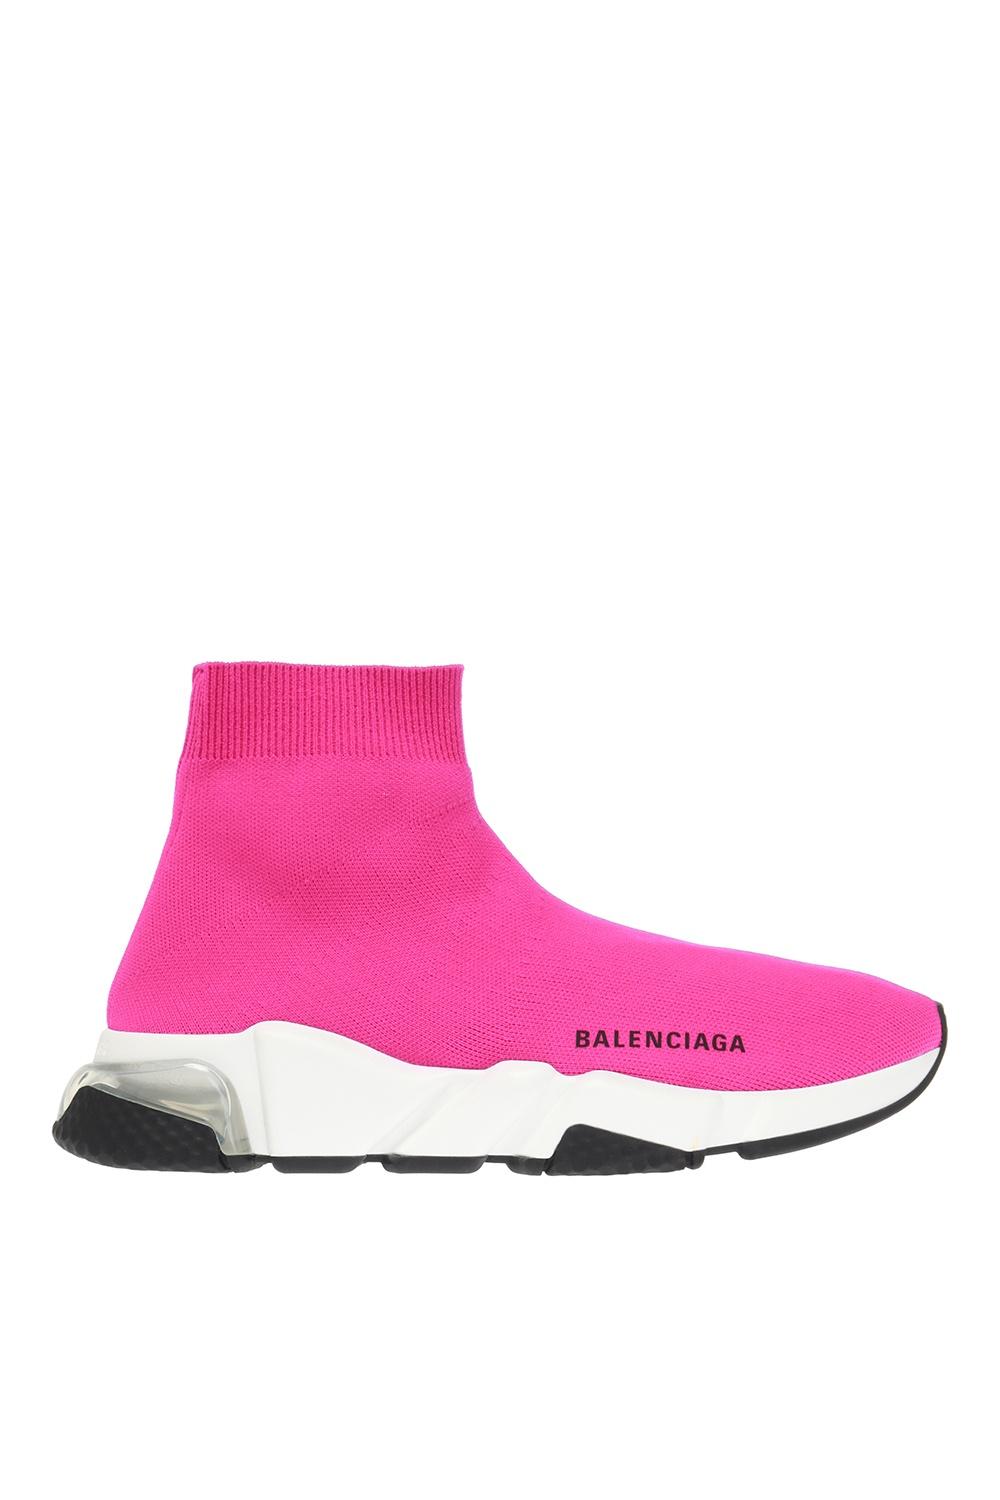 Balenciaga Women's Speed Knitted High-top Trainers in Pink | Lyst